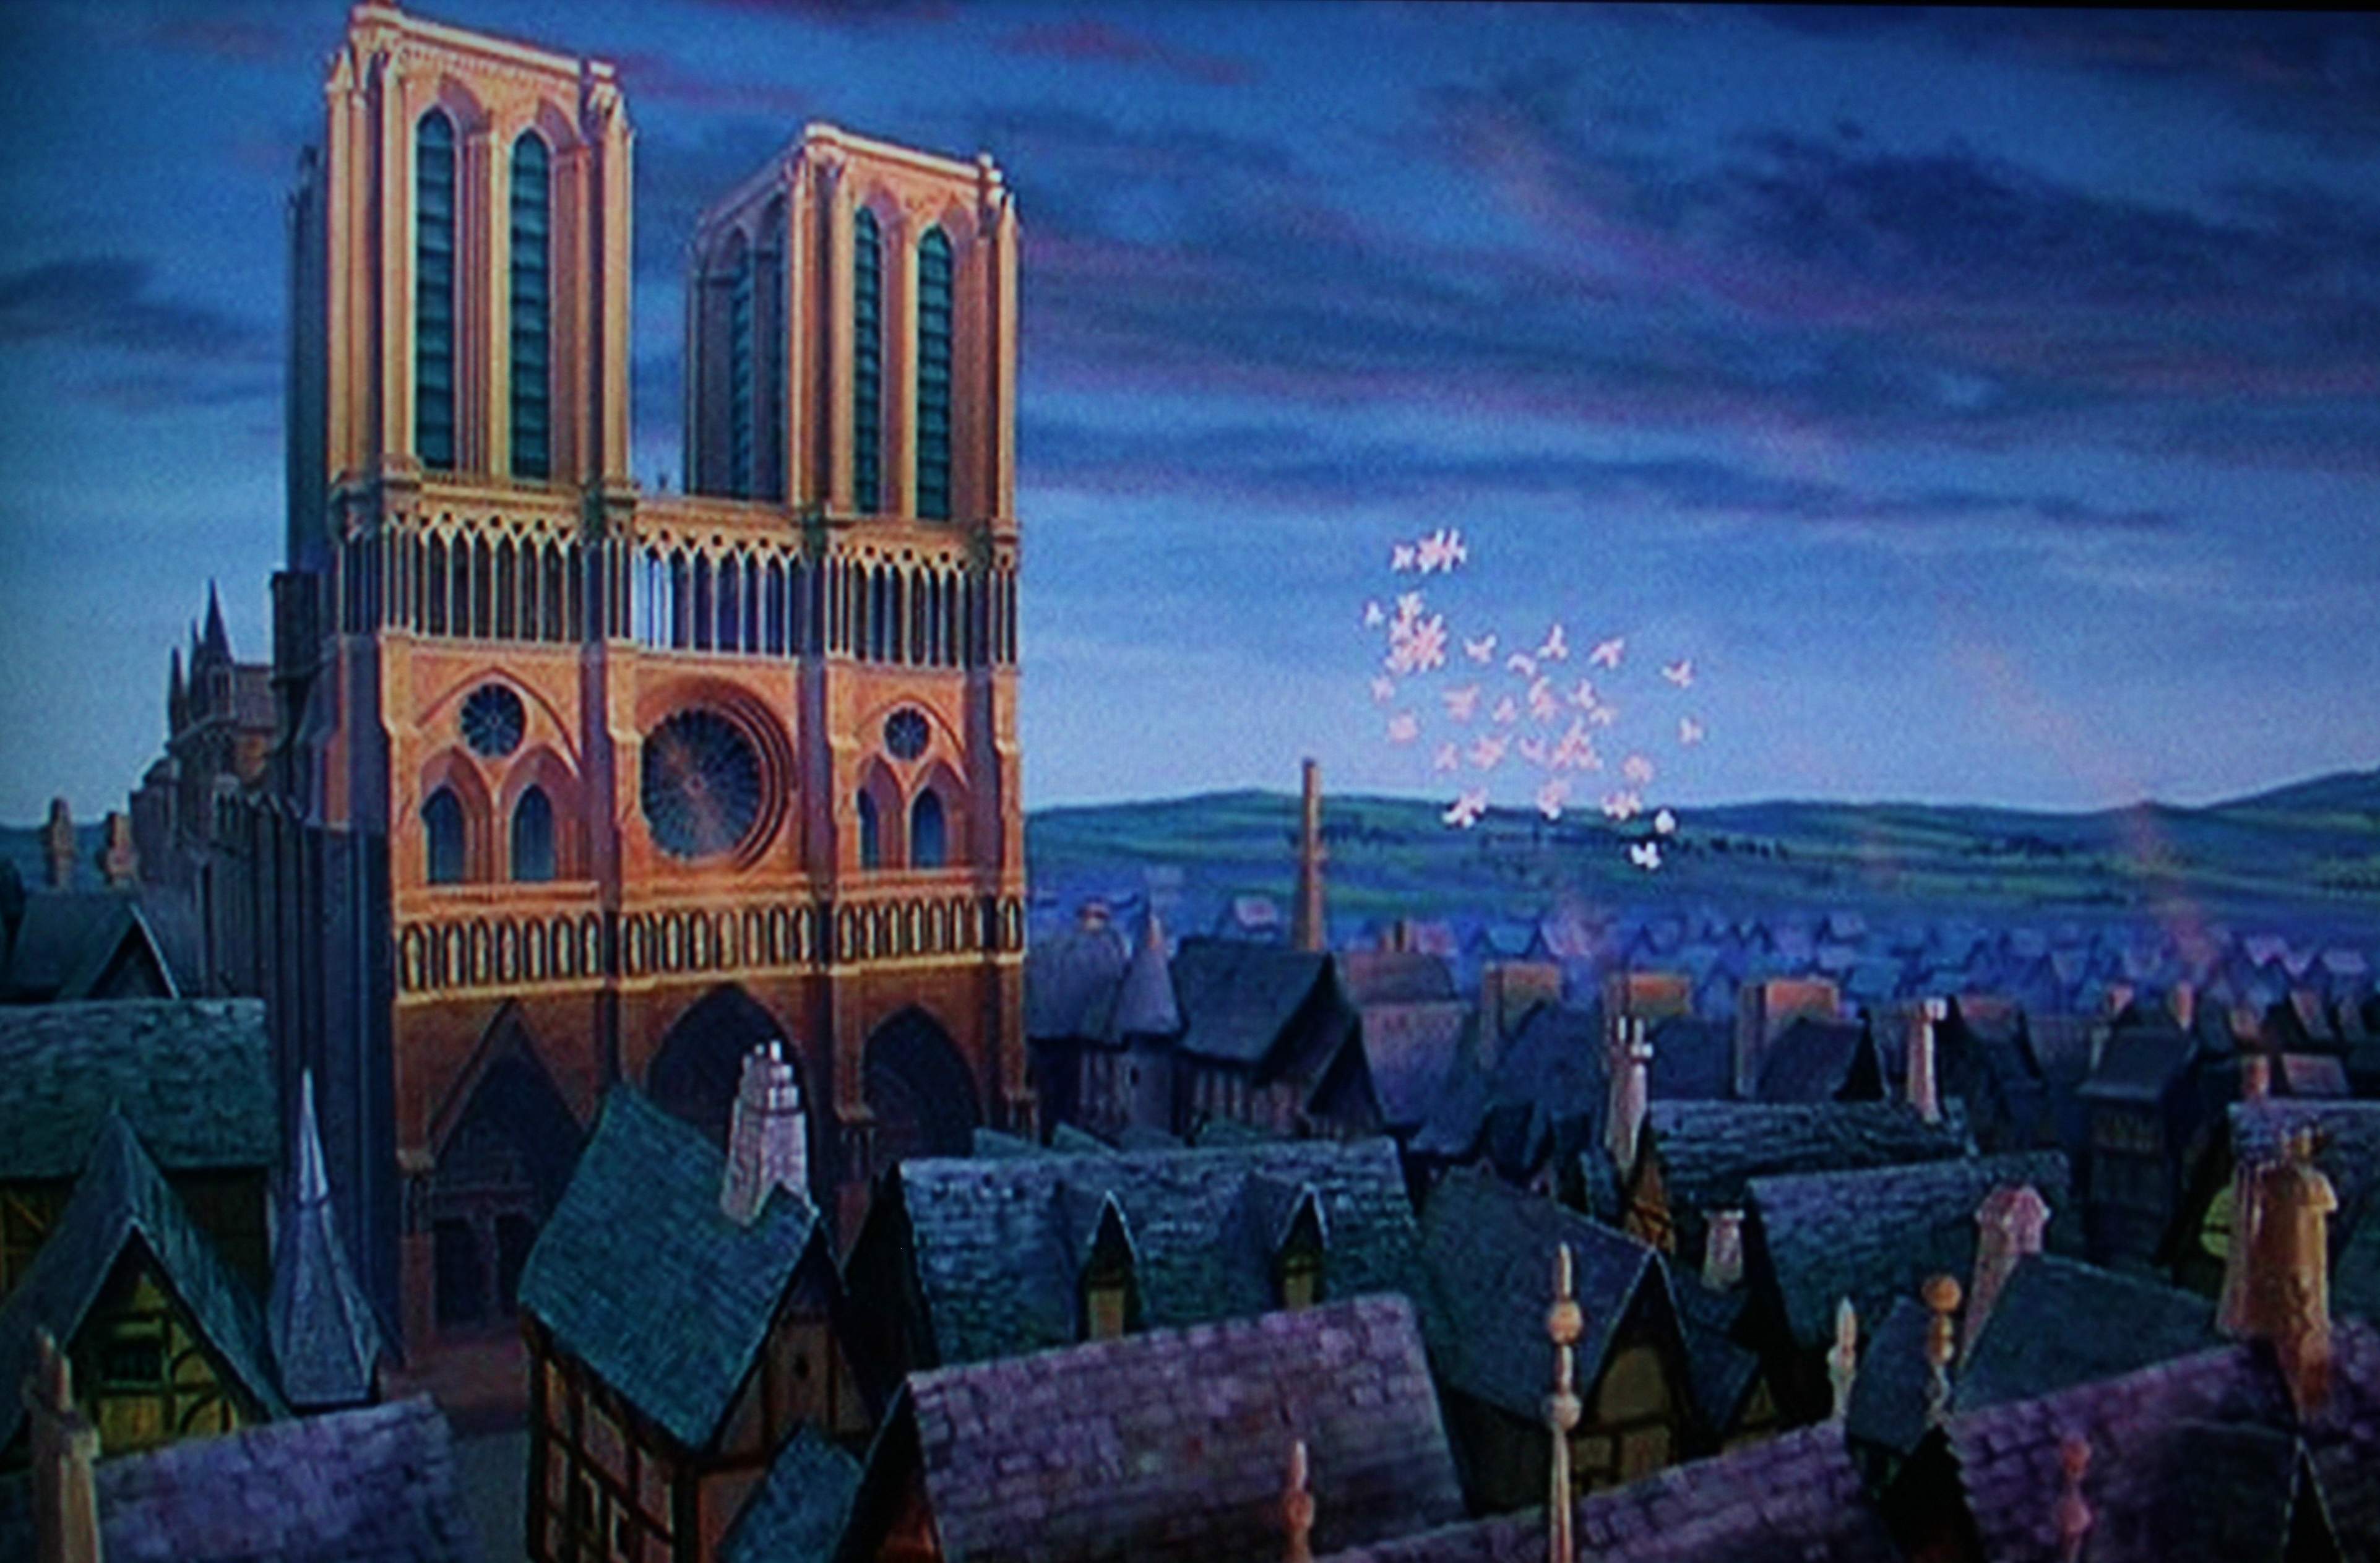 The Hunchback Of Notre Dame Wallpapers